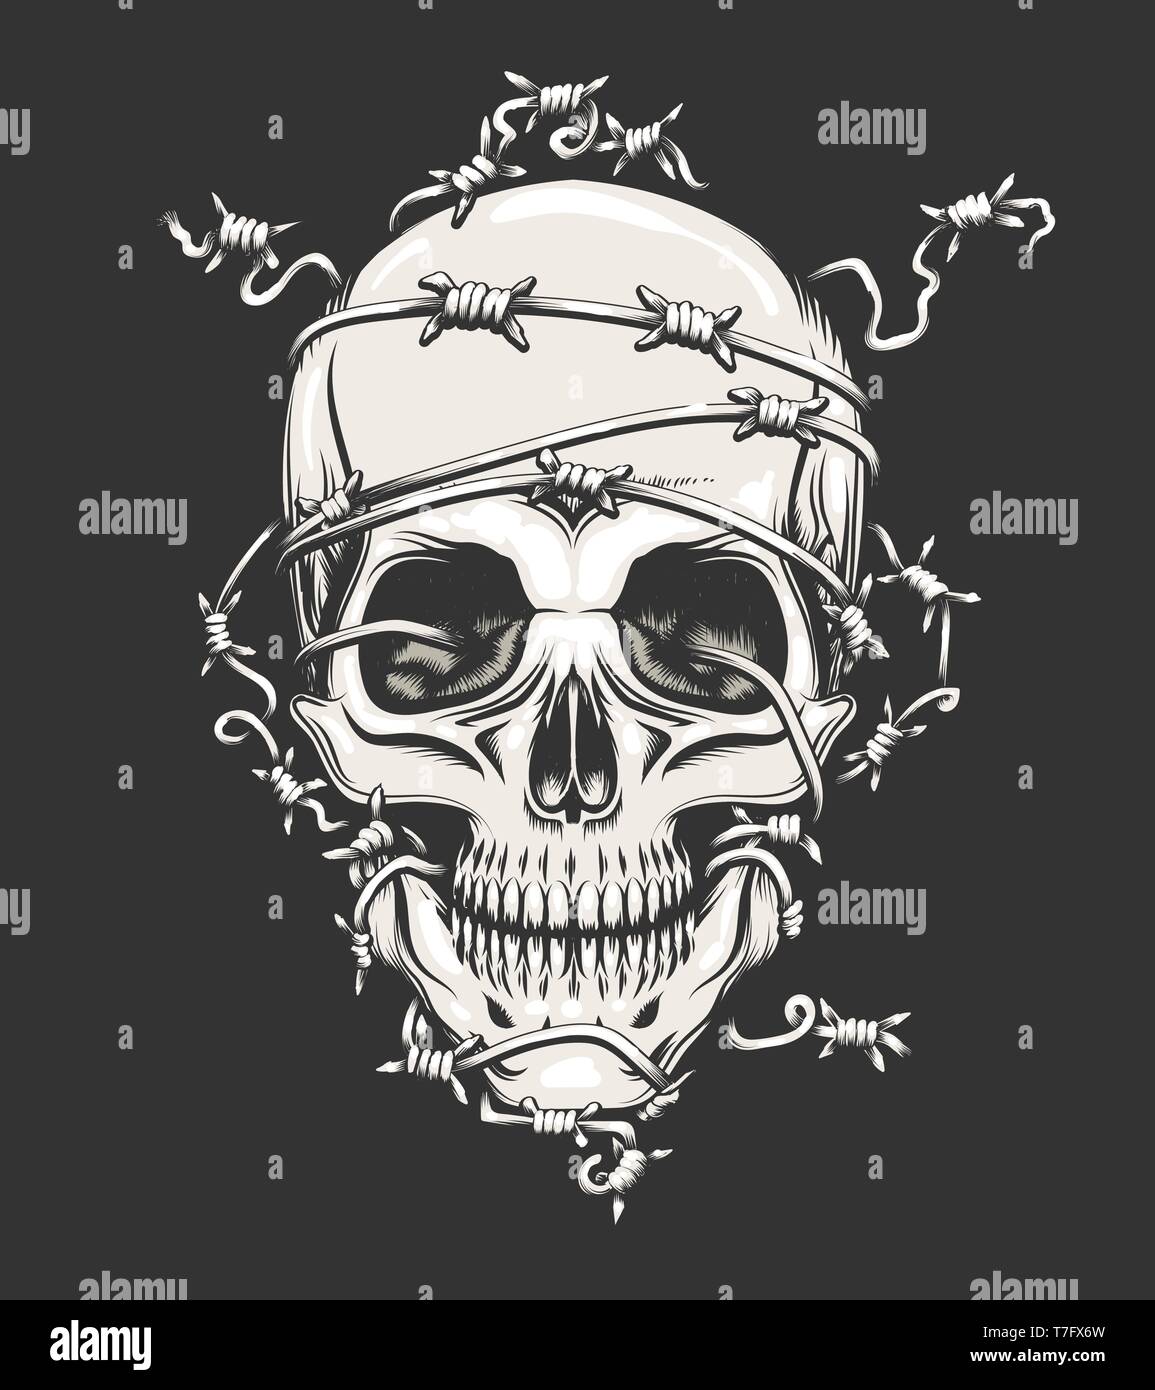 Human Skull in barbed wire drawn in tattoo style. Vector illustration. Stock Vector